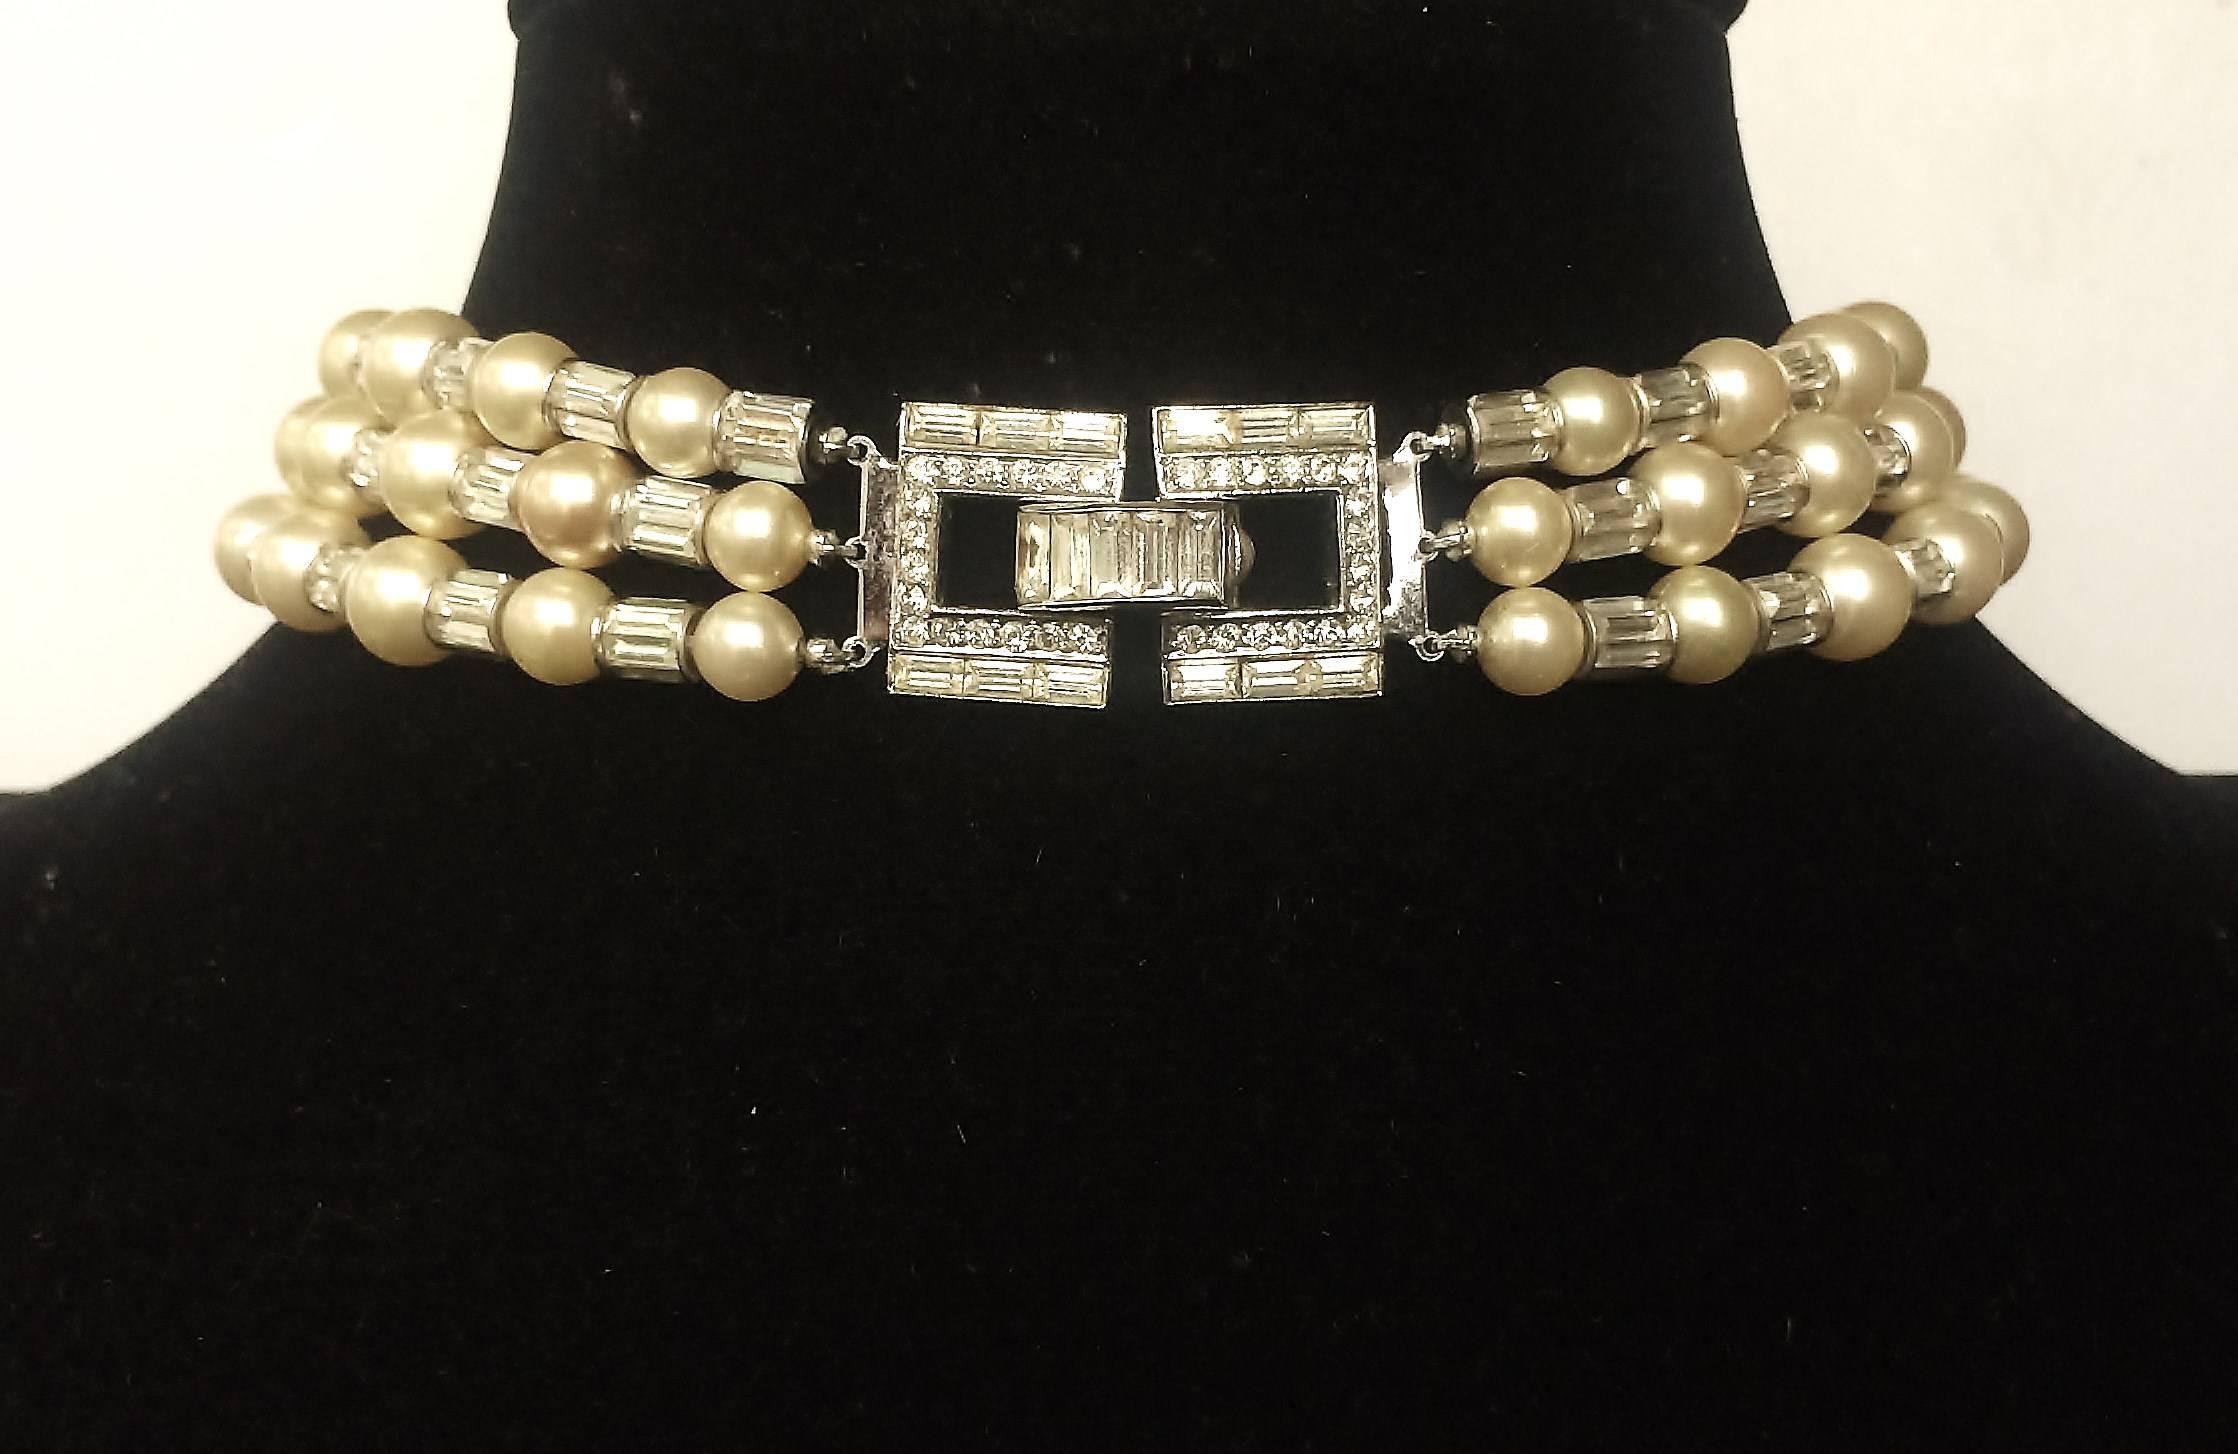 This highly elegant necklace/choker, made of glass pearls and clear paste baguette rondelles, was originally designed by Alfred Philippe of Trifari for First Lady Mamie Eisenhower, who wore it to her inaugural ball in 1953. She broke with tradition